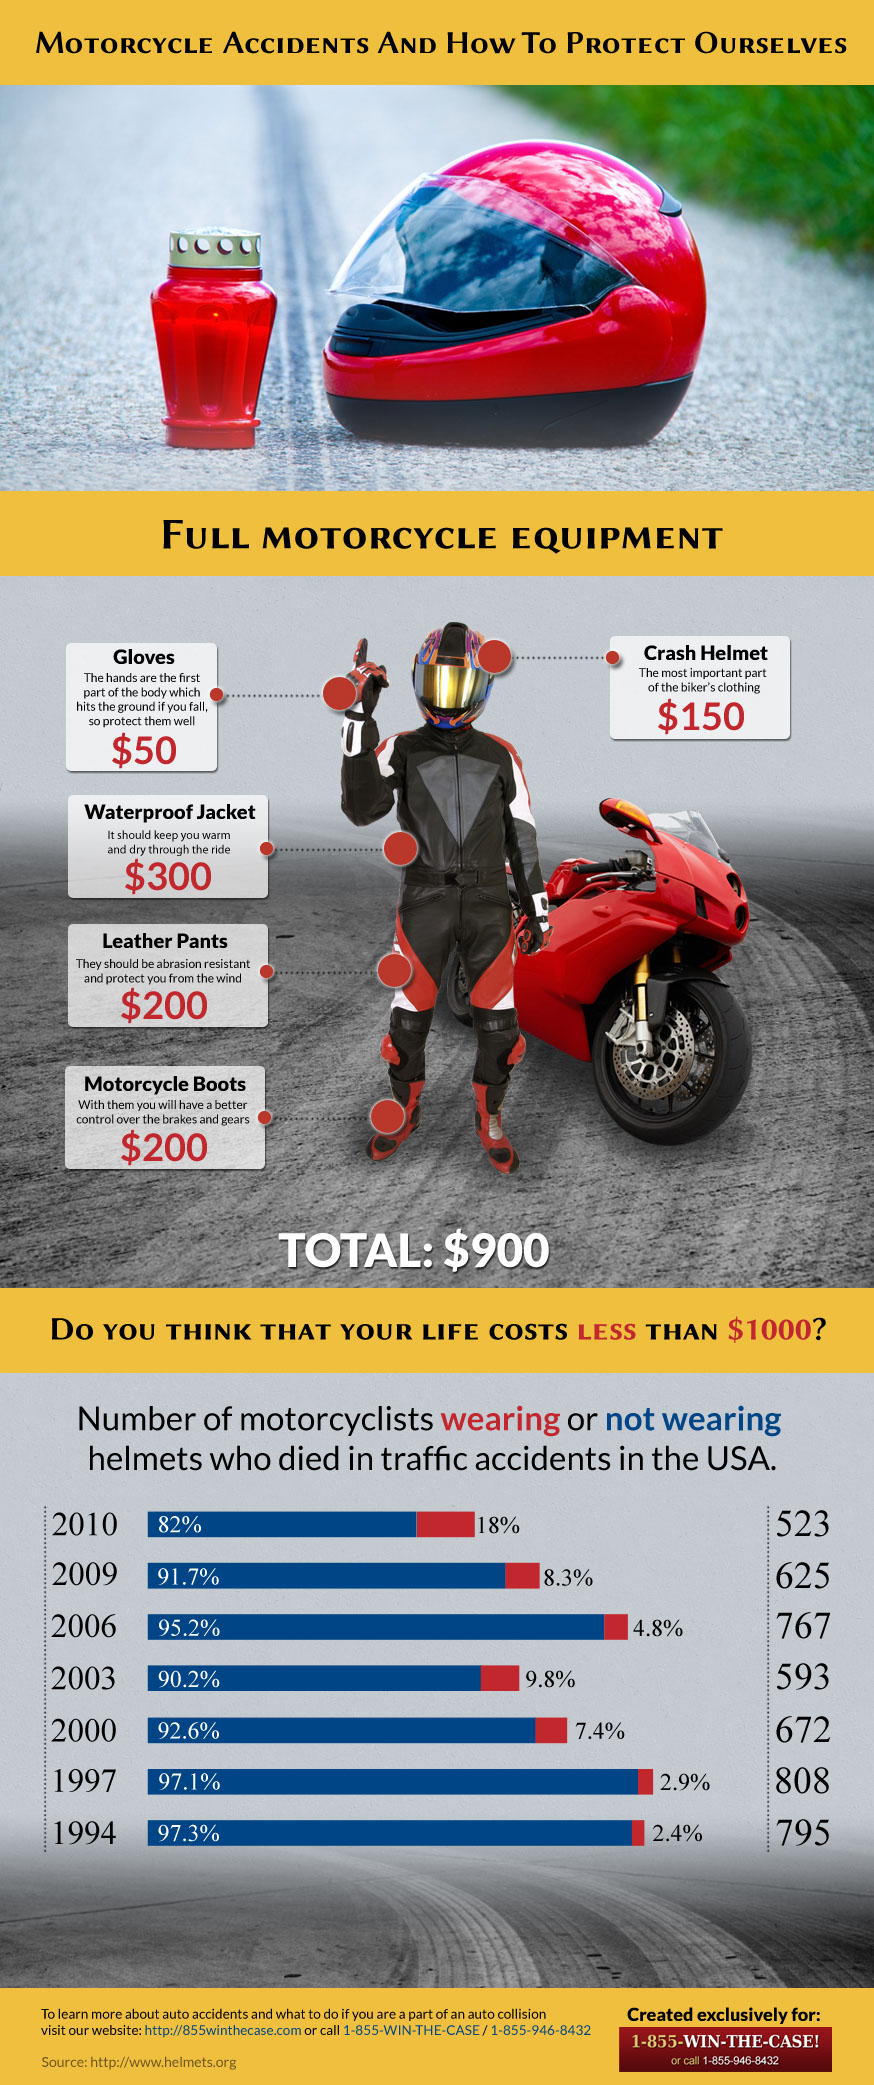 Motorcycle-Accidents-And-How-To-Protect-Infographic-infographicsmania.jpg